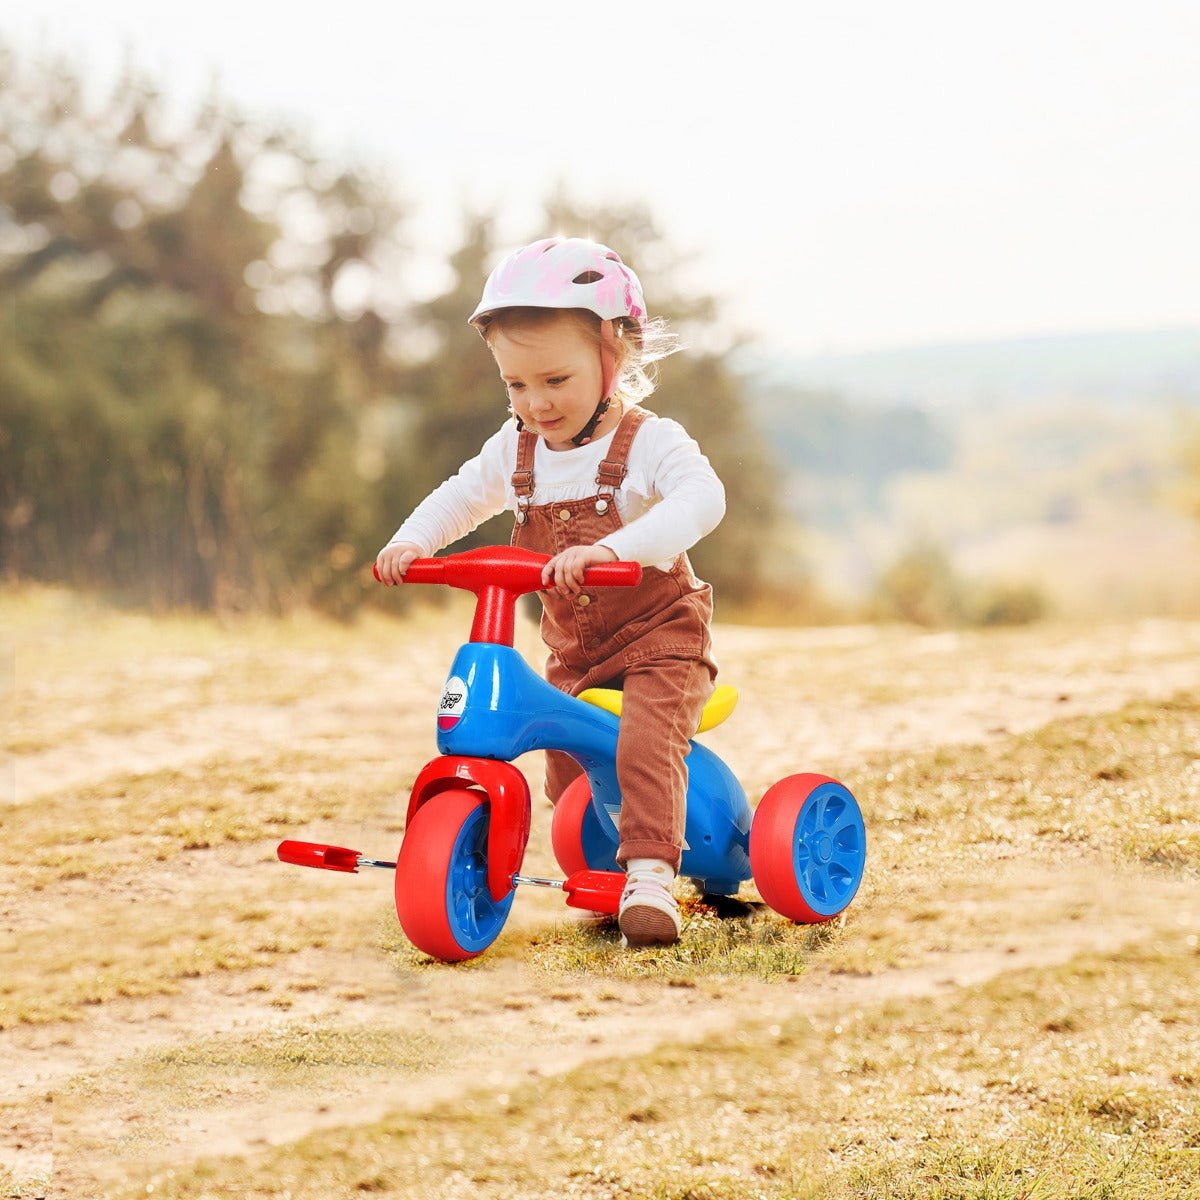 Toddler's Ride: Blue Tricycle with Foot Pedals for Outdoor Exploration